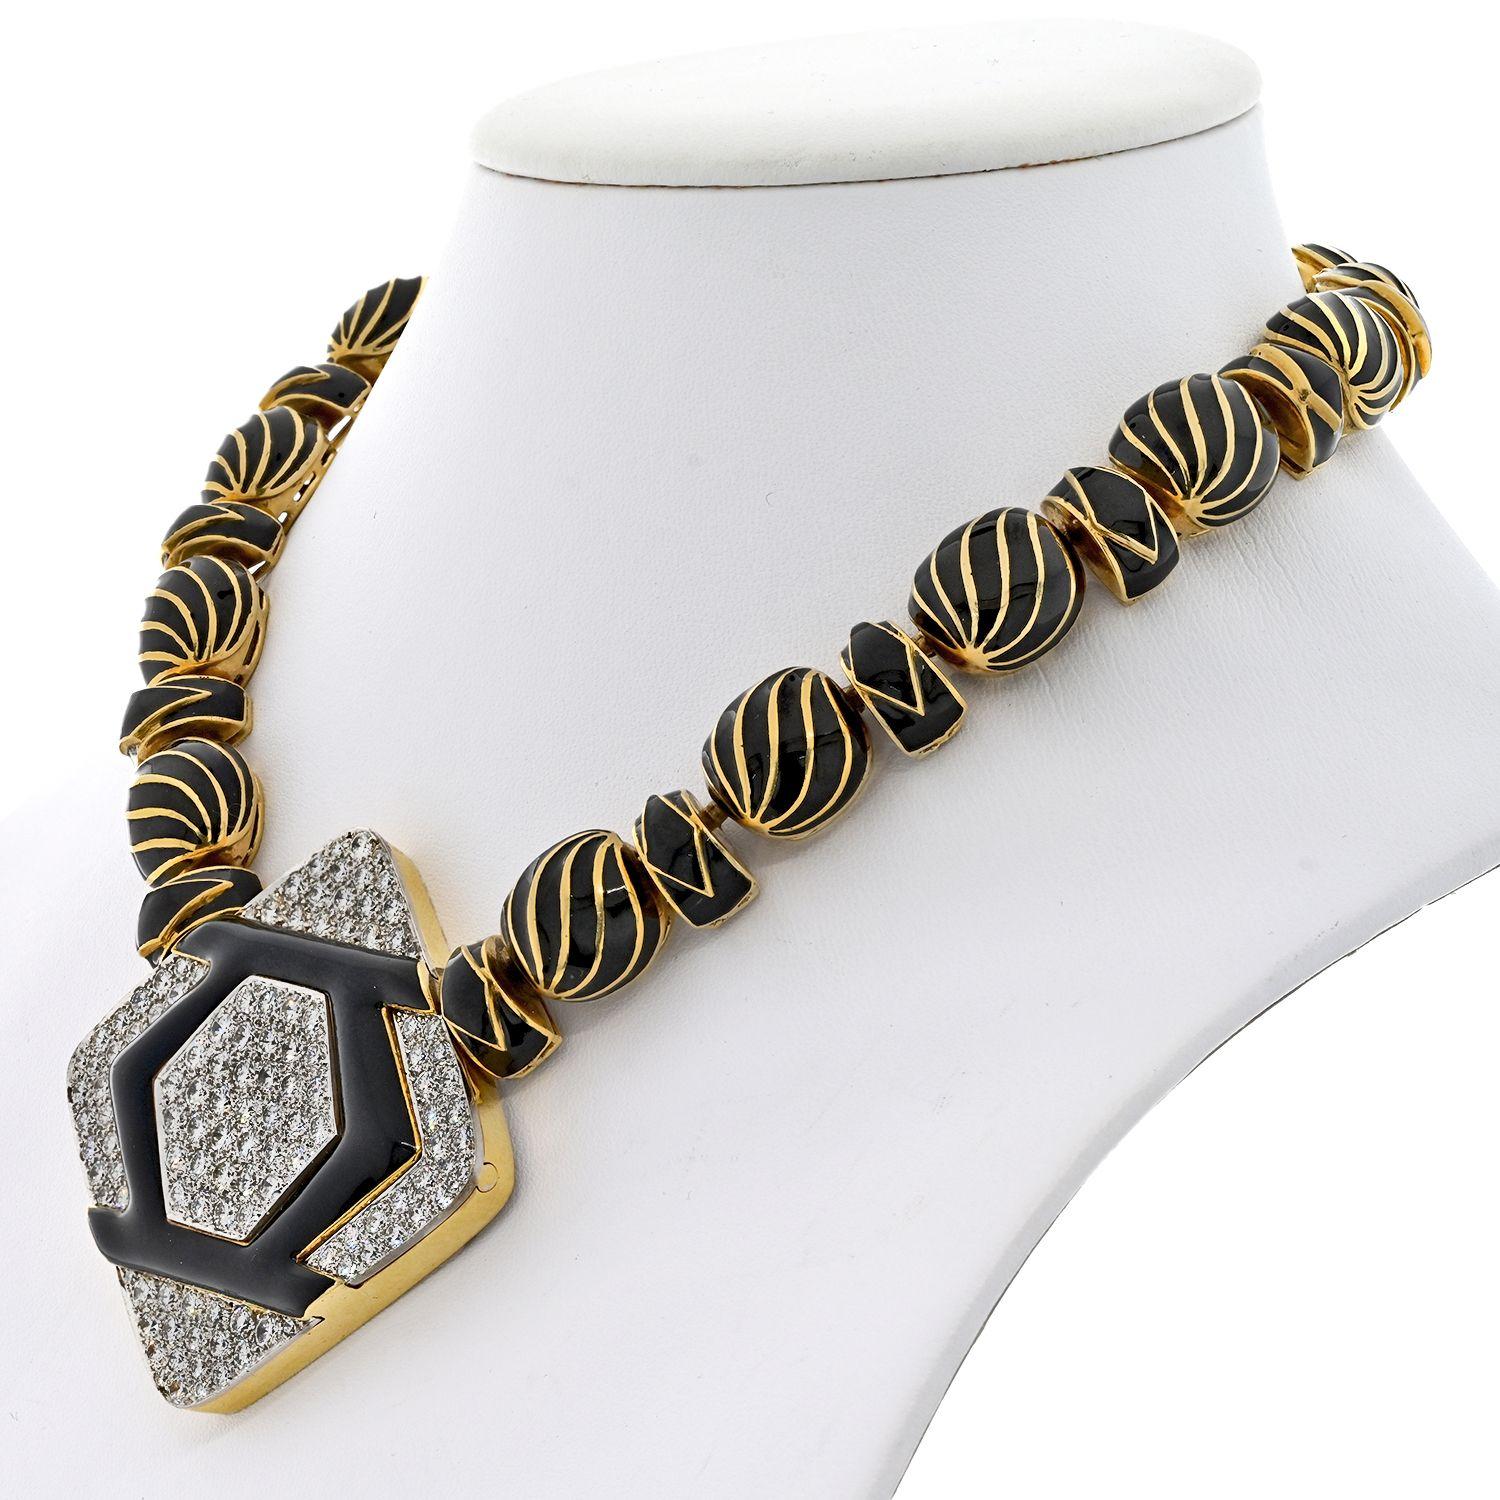 Presenting a captivating pre-owned estate necklace from the masterful hands of renowned designer David Webb. Crafted as part of the esteemed Manhattan Minimalism collection, this exquisite piece showcases the perfect blend of elegance and modernity.